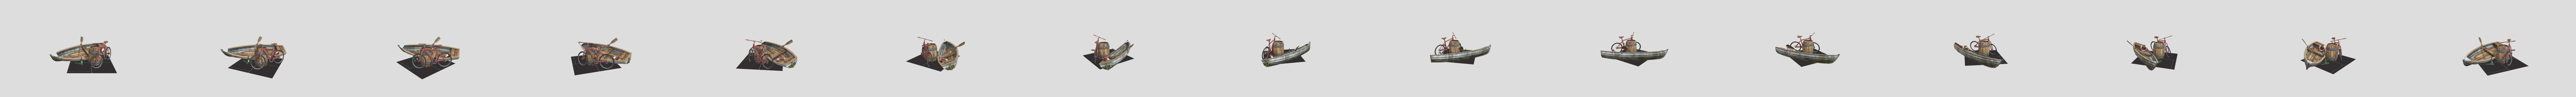 DAE 5 Finished props - By The Ocean - Download Free 3D model by Immanuel  Claerhout (@immanuel.claerhout999) [115c81e]